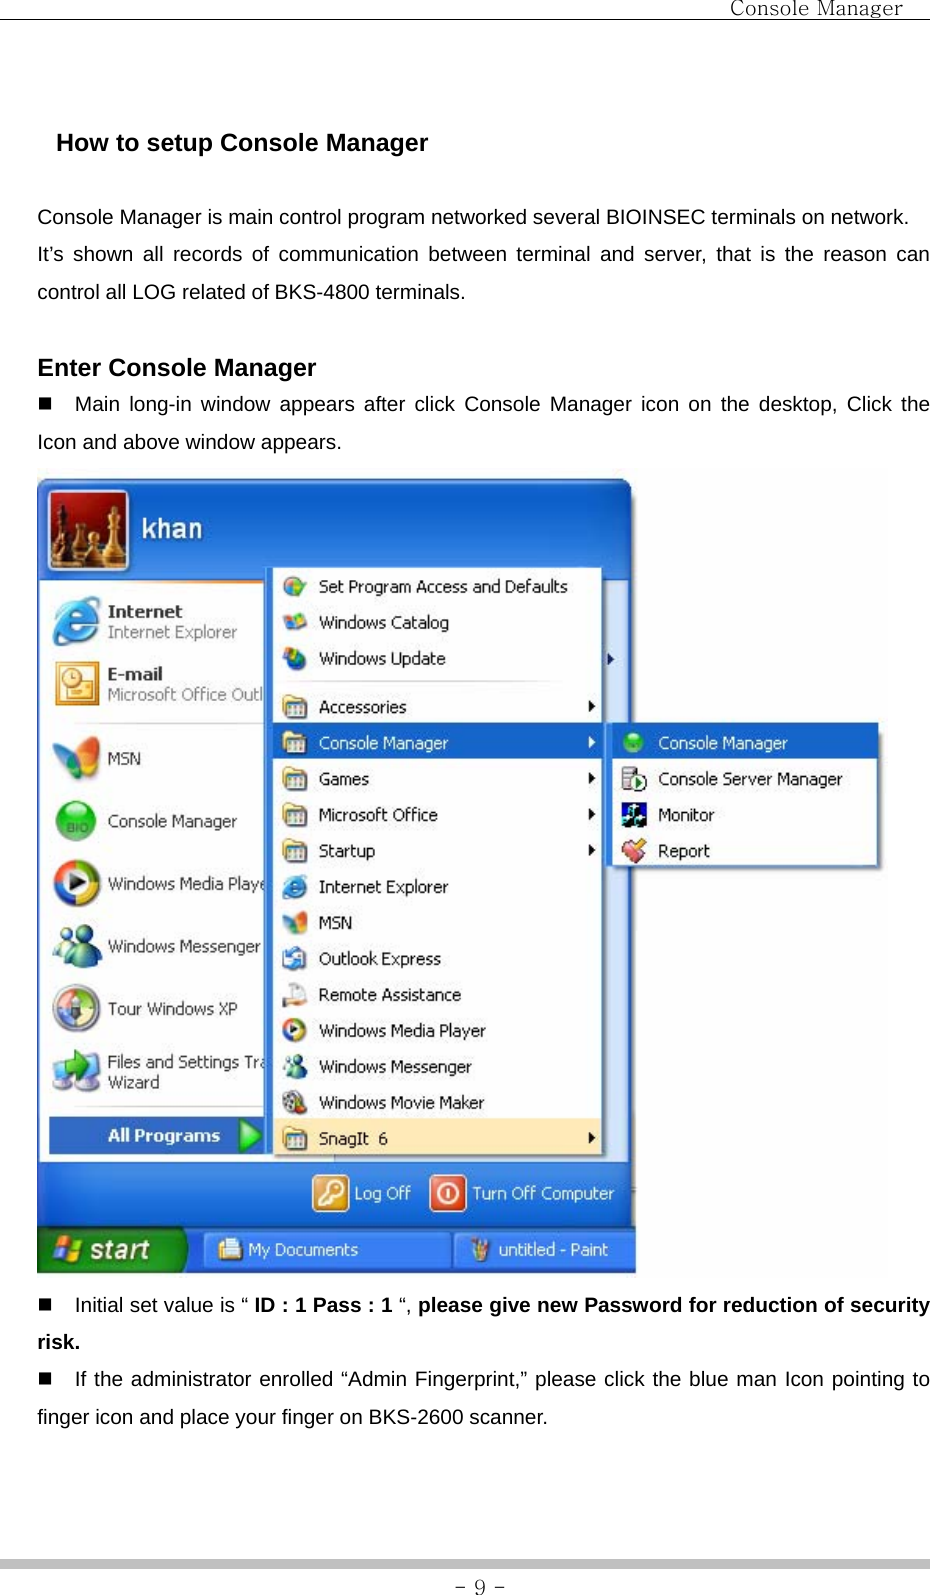                                Console Manager               - 9 -   How to setup Console Manager  Console Manager is main control program networked several BIOINSEC terminals on network. It’s shown all records of communication between terminal and server, that is the reason can control all LOG related of BKS-4800 terminals.    Enter Console Manager   Main long-in window appears after click Console Manager icon on the desktop, Click the Icon and above window appears.    Initial set value is “ ID : 1 Pass : 1 “, please give new Password for reduction of security risk.   If the administrator enrolled “Admin Fingerprint,” please click the blue man Icon pointing to finger icon and place your finger on BKS-2600 scanner. 